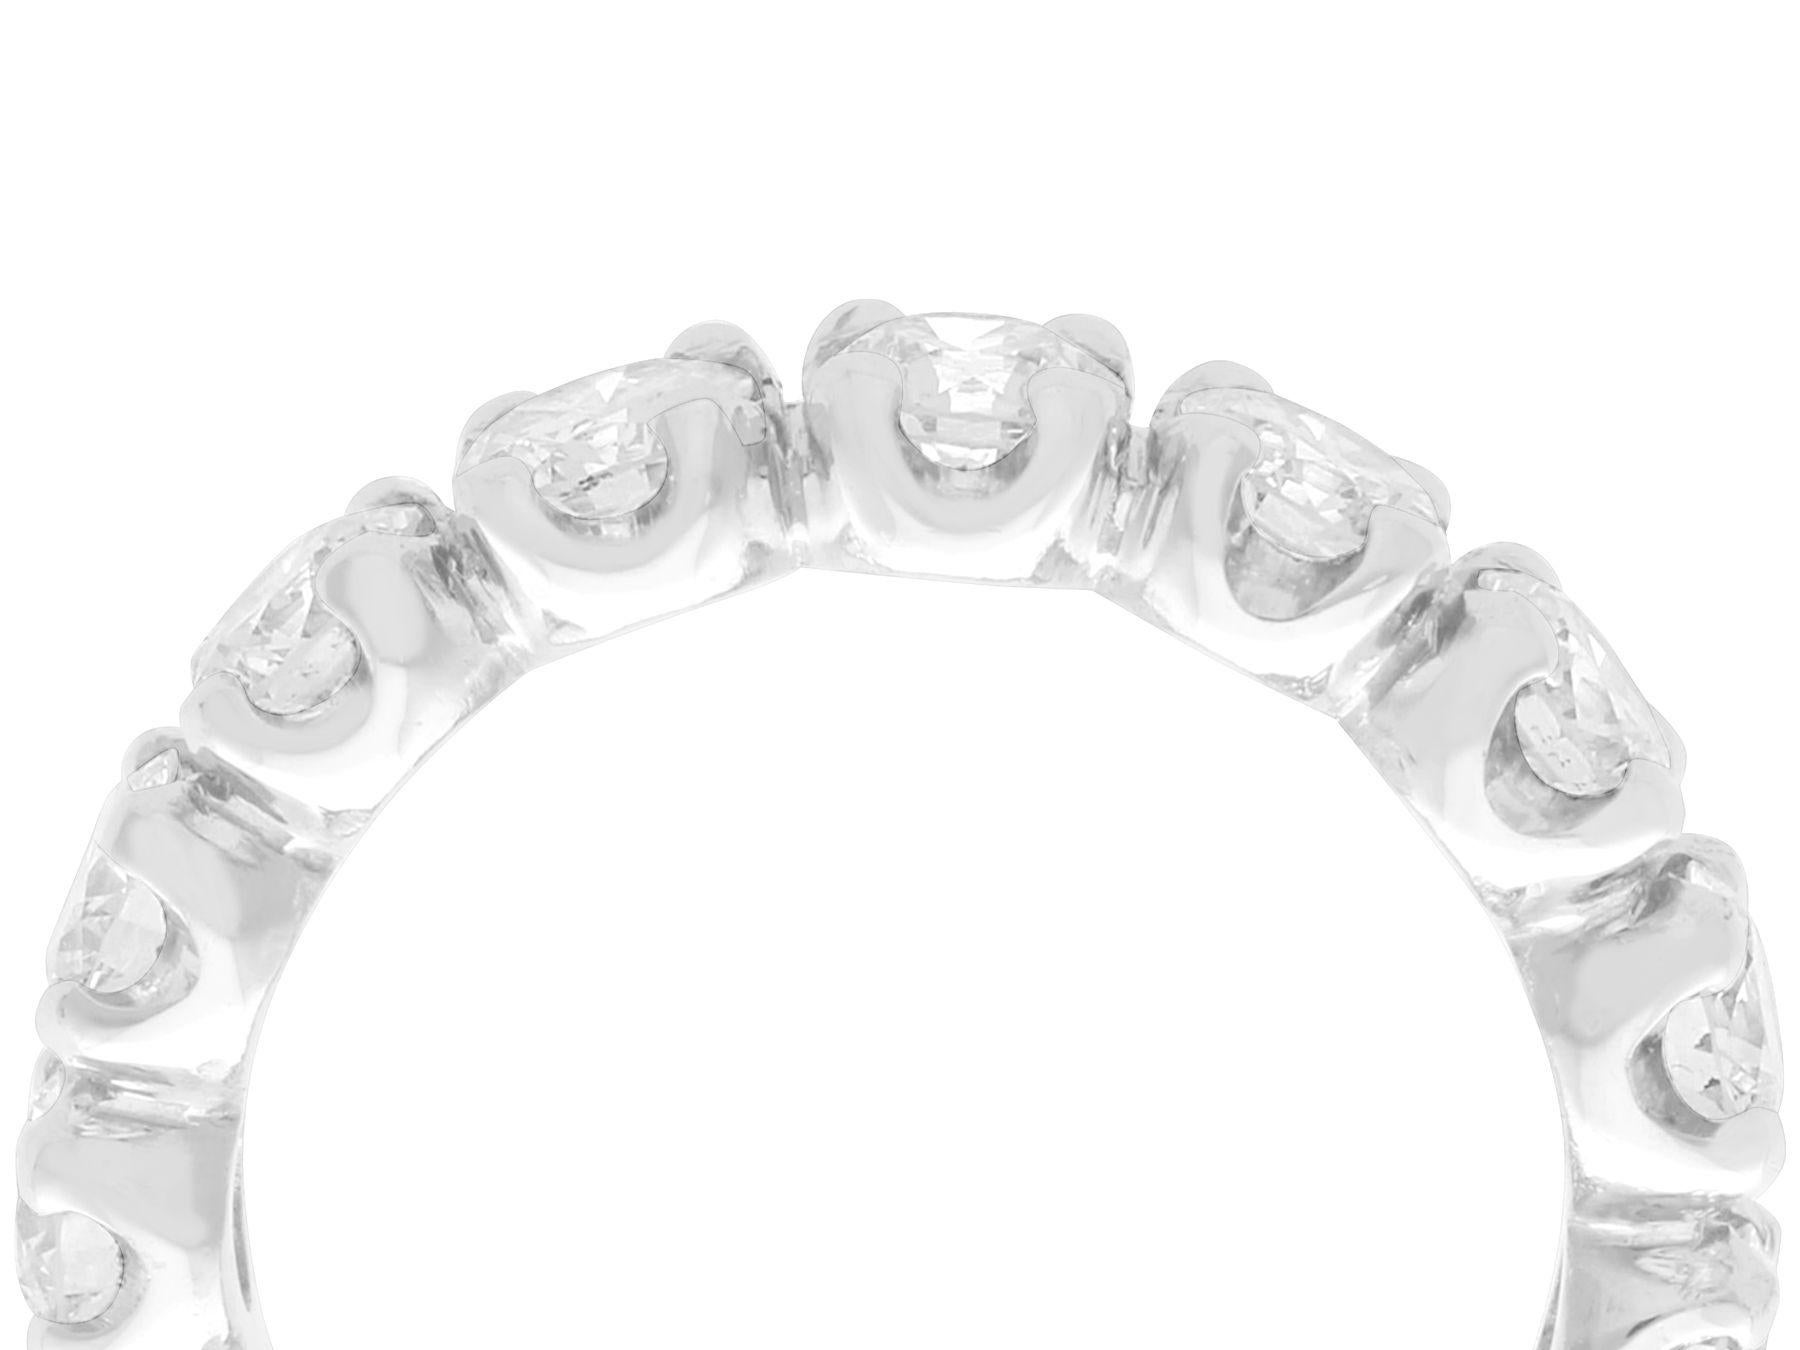 A stunning, fine and impressive vintage French 4.10 carat diamond and 18 karat white gold full eternity ring; part of our diverse diamond jewelry and estate jewelry collections. 

This stunning, fine and impressive full eternity ring has been